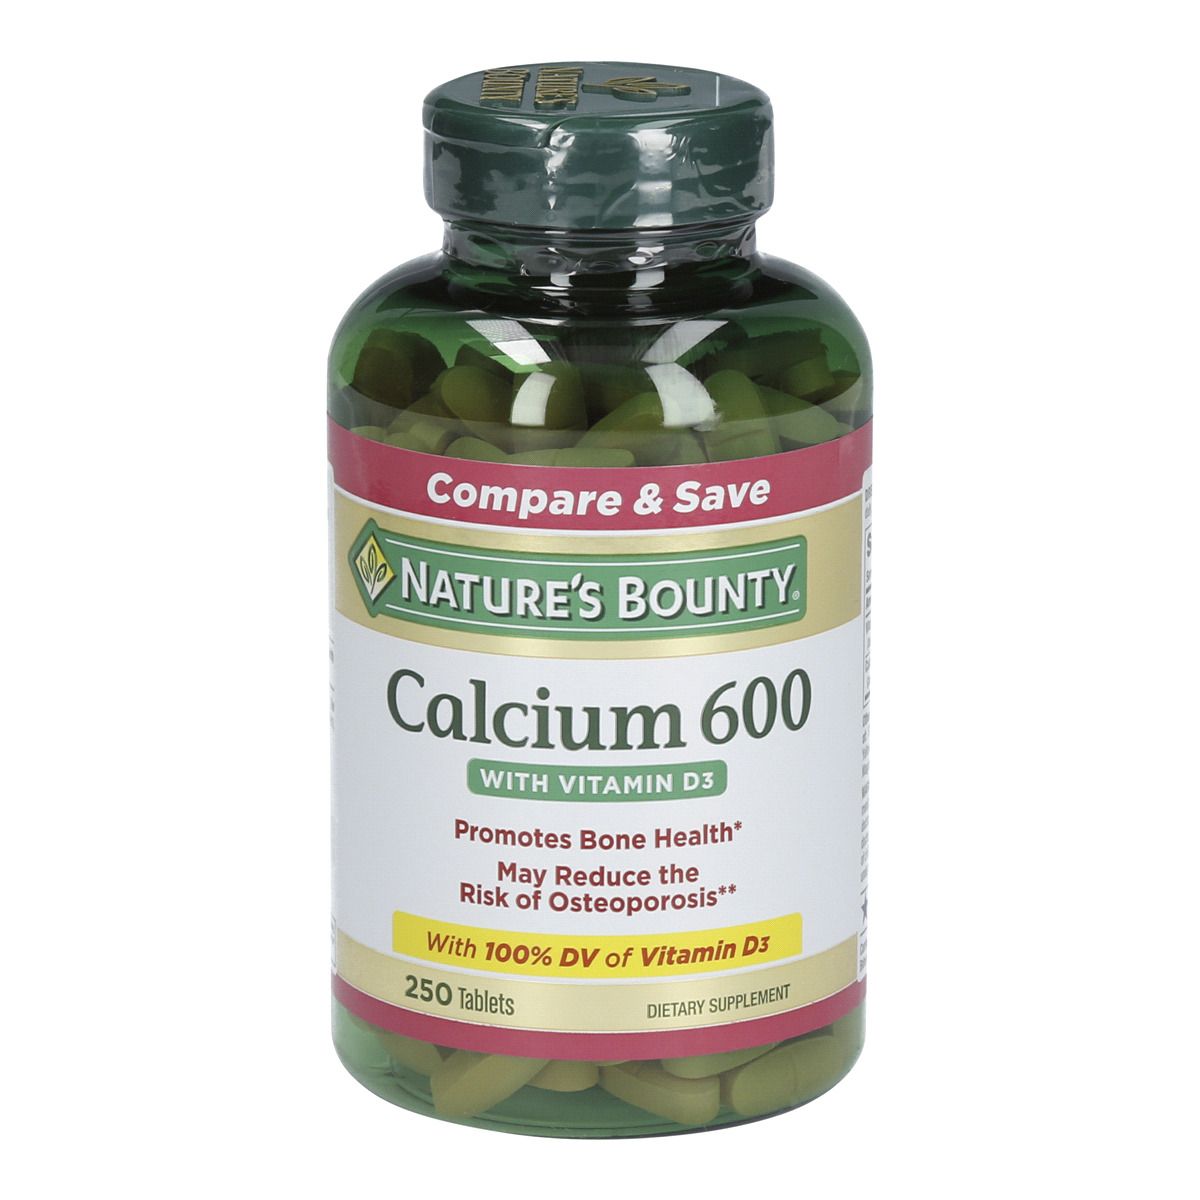 Nature's Bounty Calcium 600 with Vitamin D3 Tablets - 250 ct